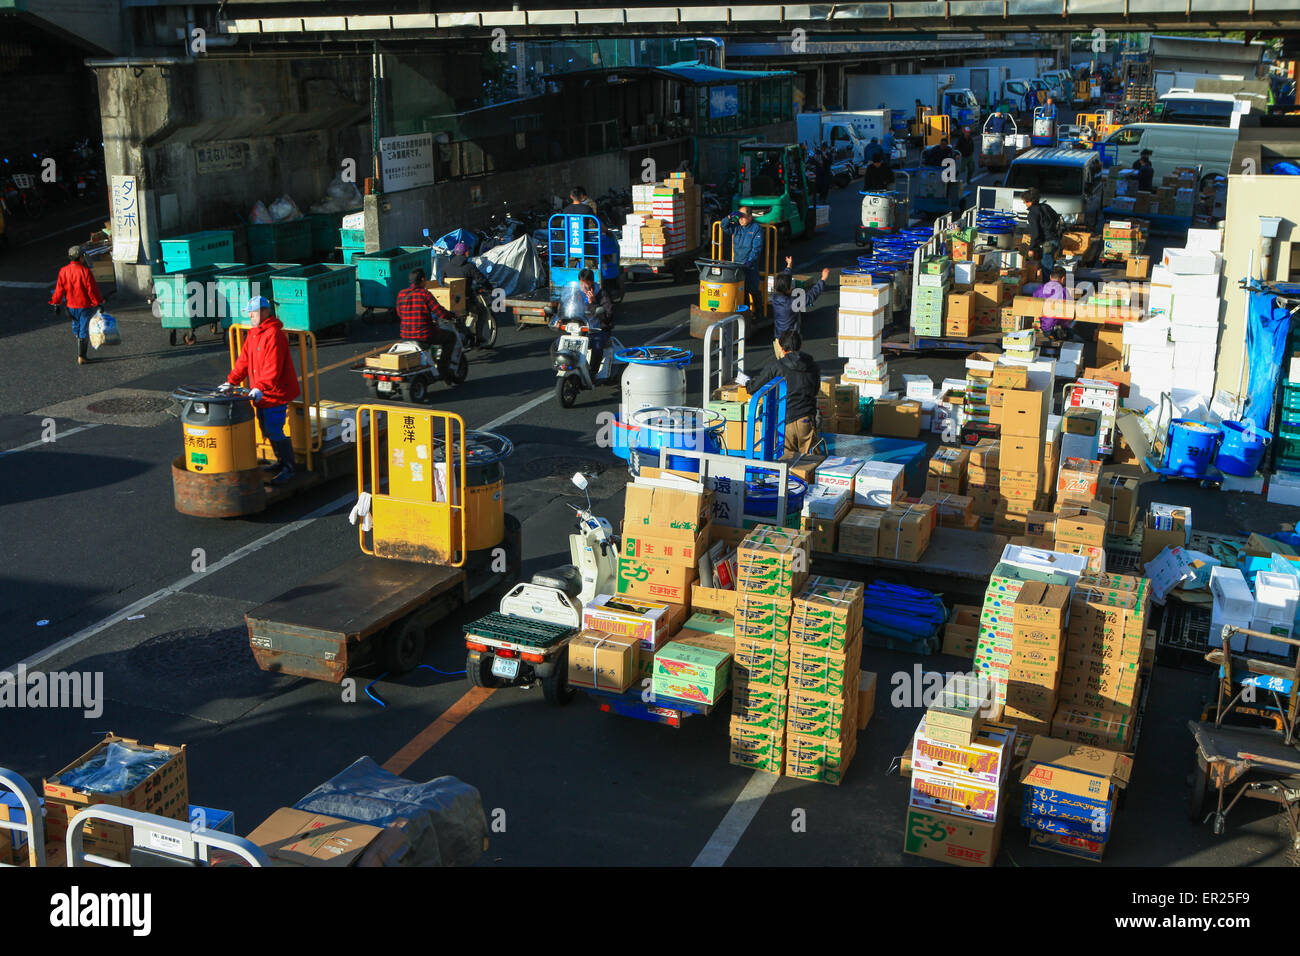 Workers at Famous Tsukiji fish market operational area. Tsukiji is the biggest fish market in the world. Stock Photo